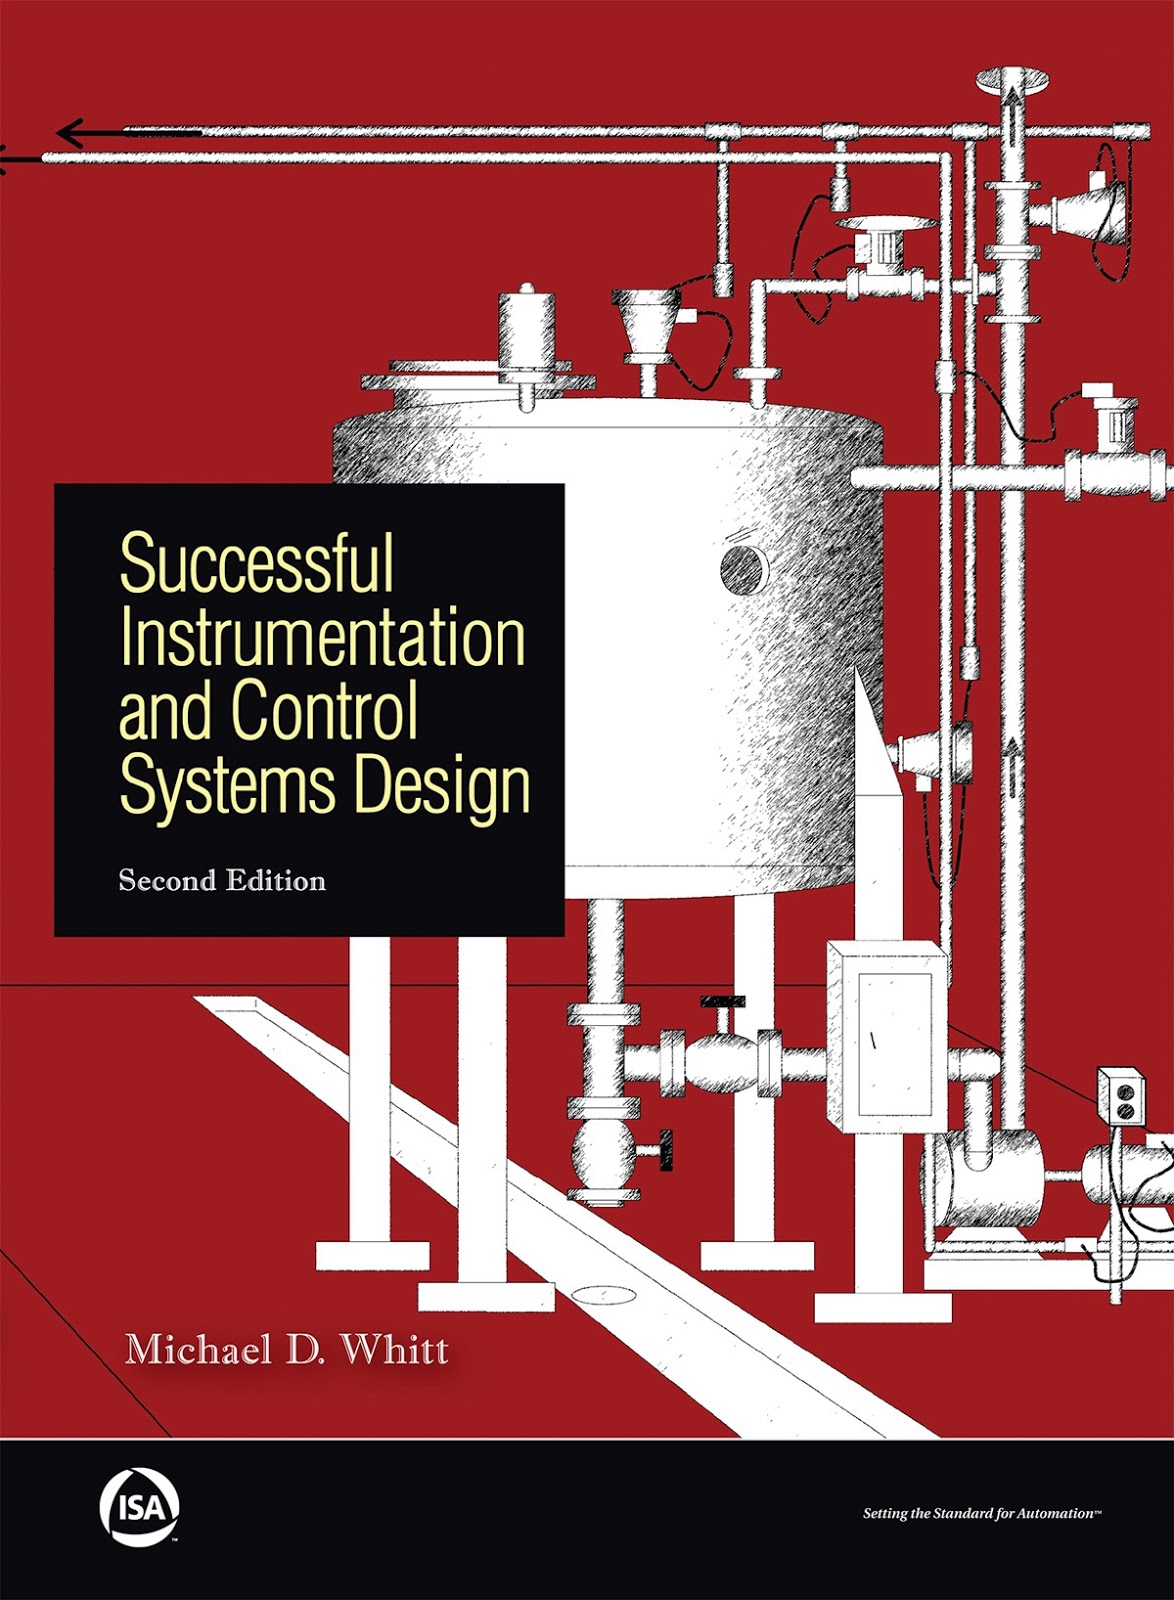 instrumentation and control engineering thesis topics